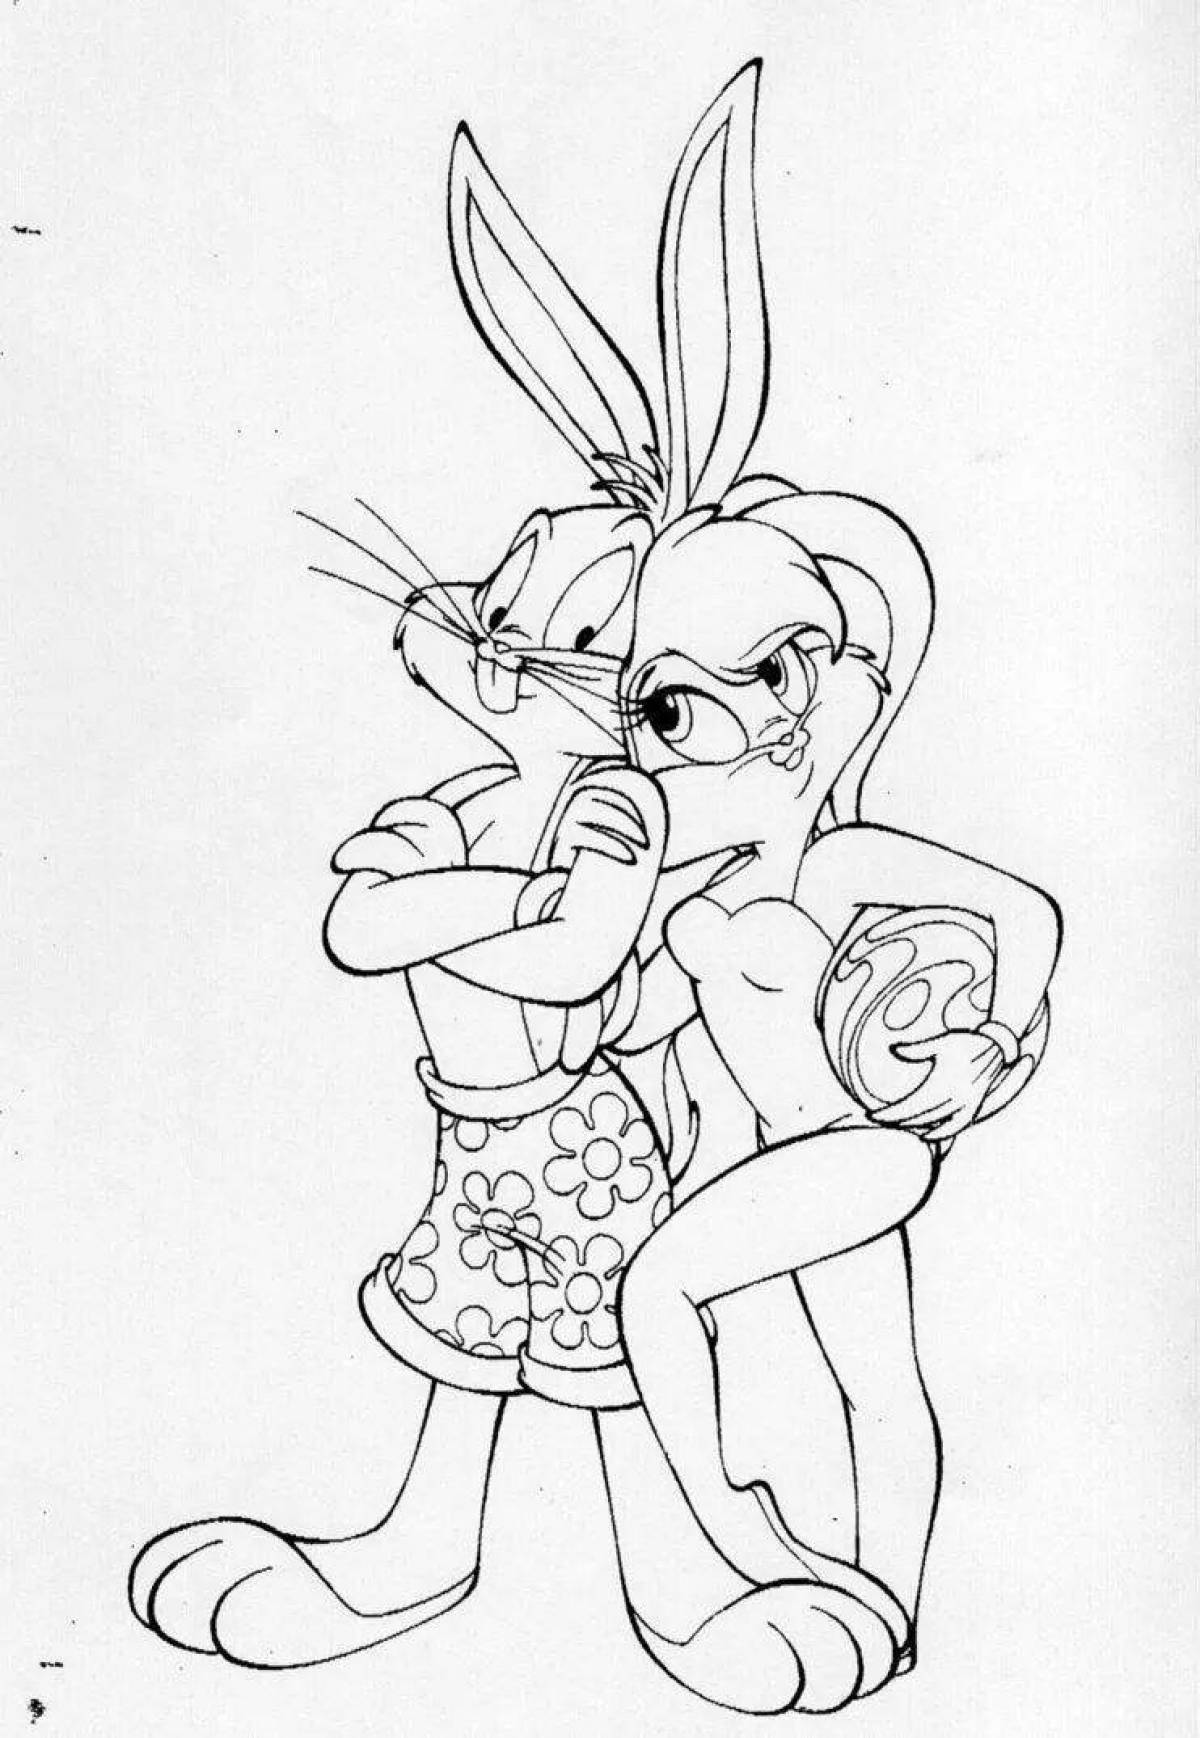 Lola Bunny's playful coloring page